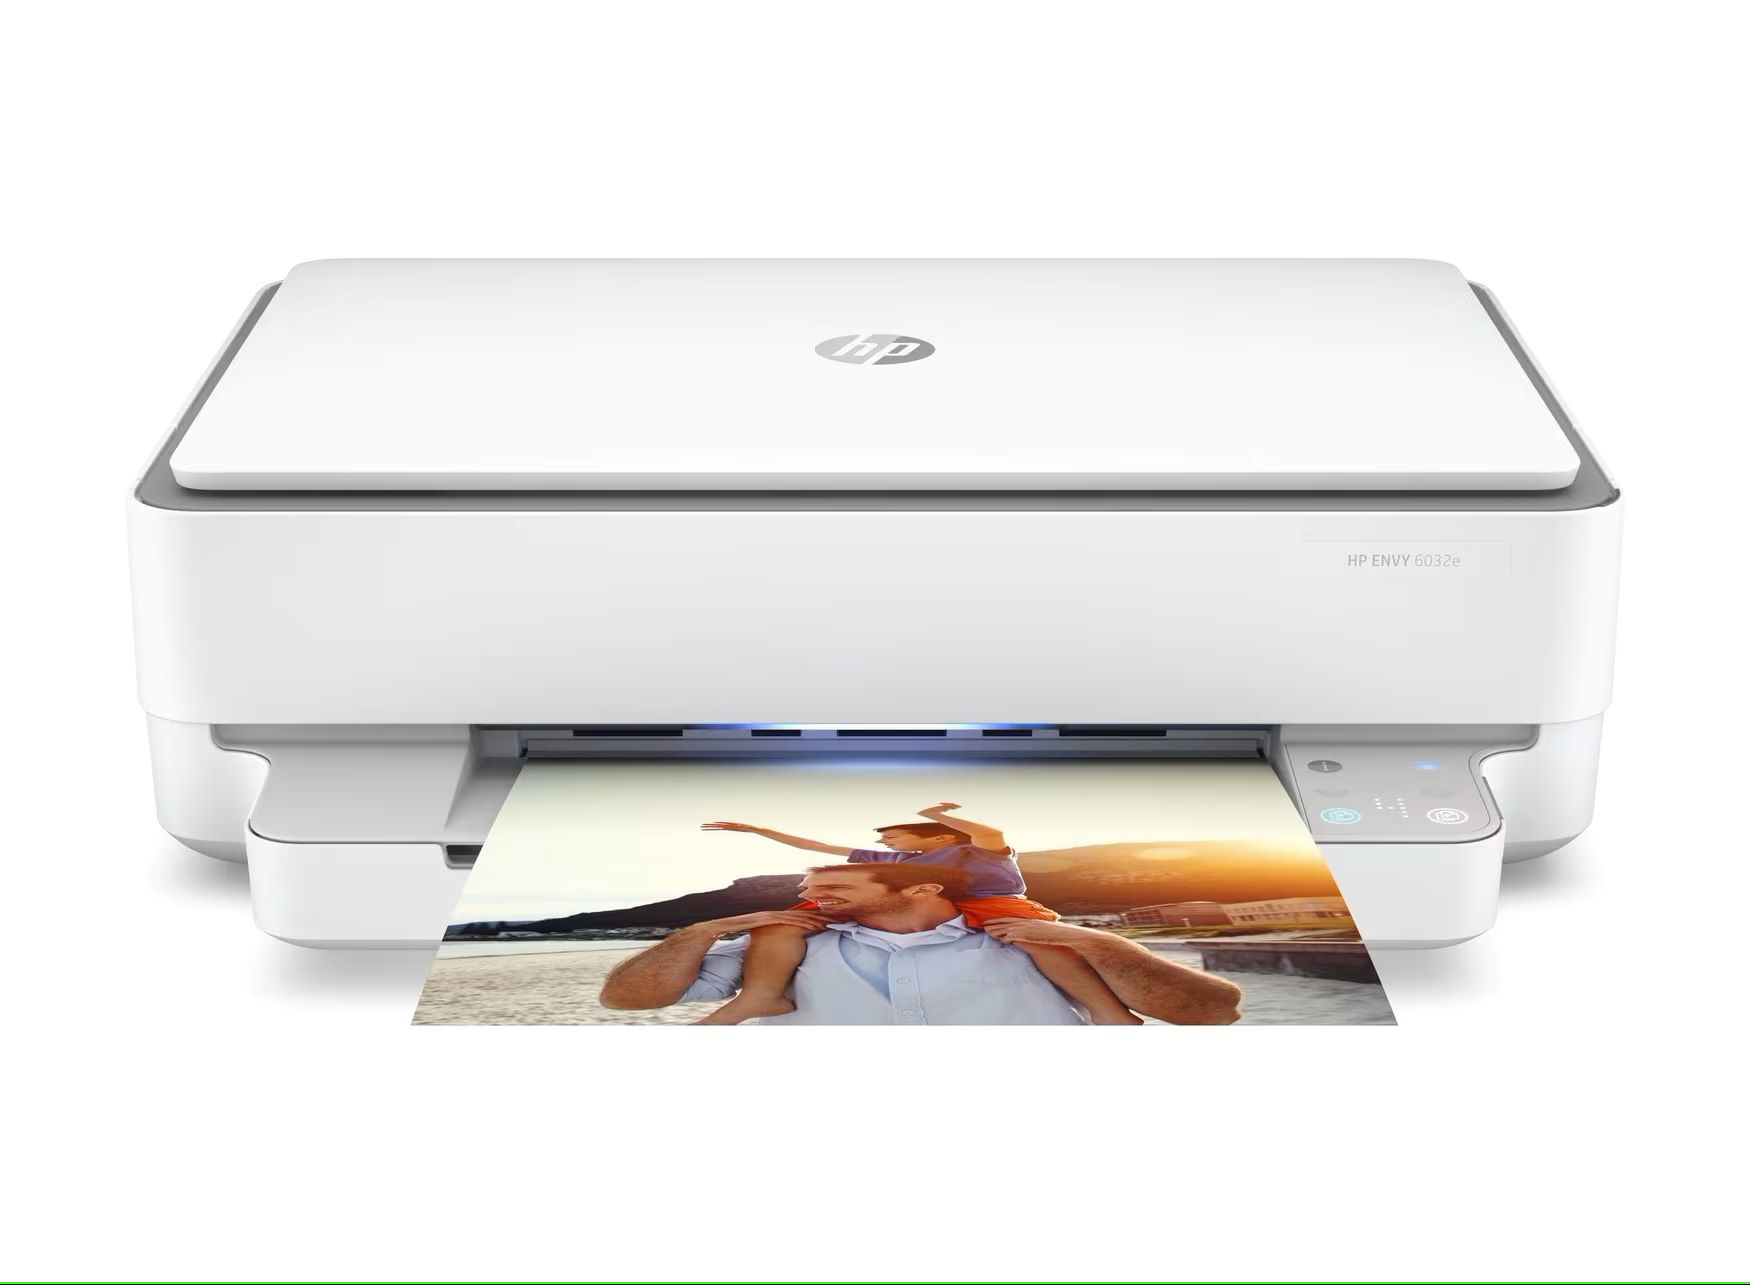 How To Put Ink Cartridge In A HP Printer Envy 6000